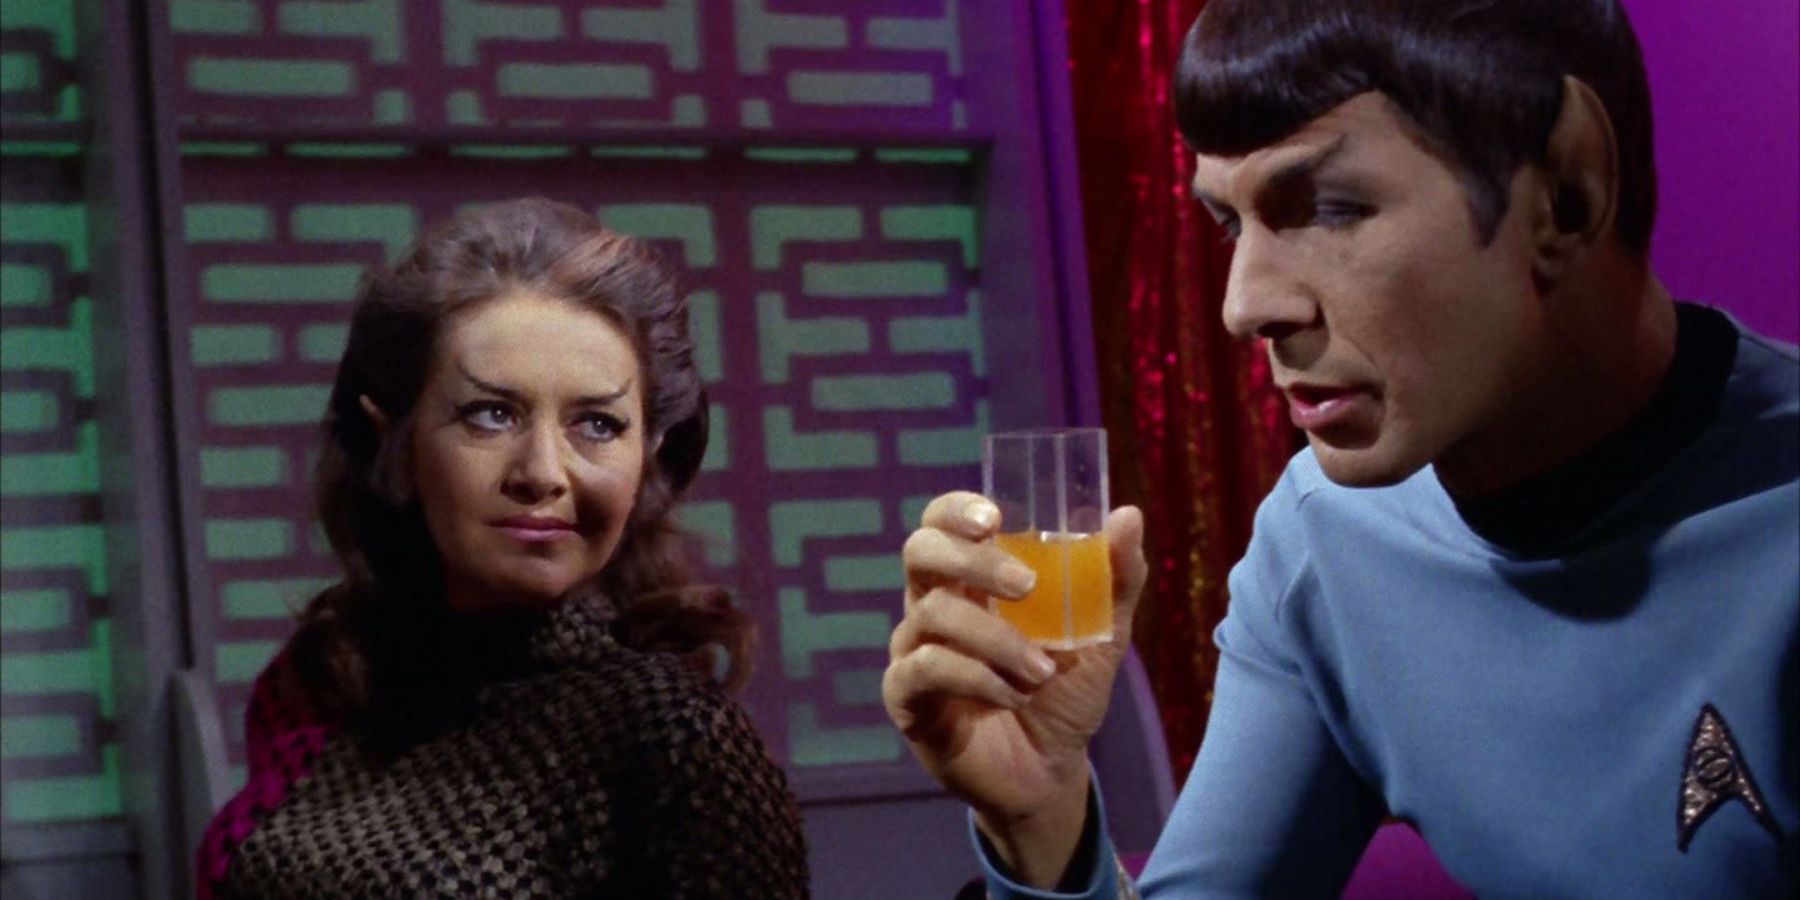 Spock with a Romulan woman